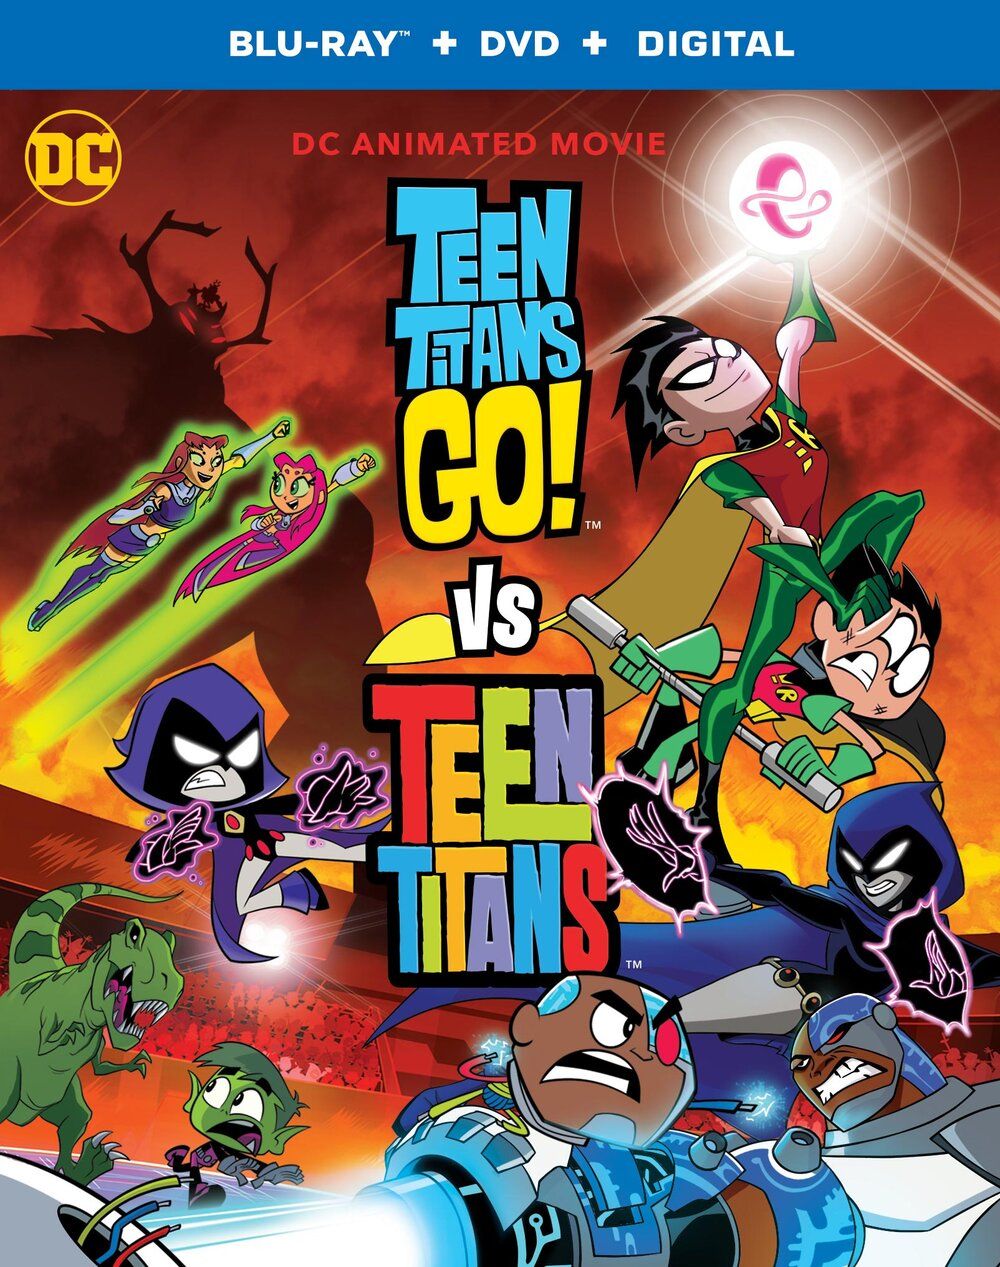 It's Teen Titans Go! vs. Teen Titans in a new clip from